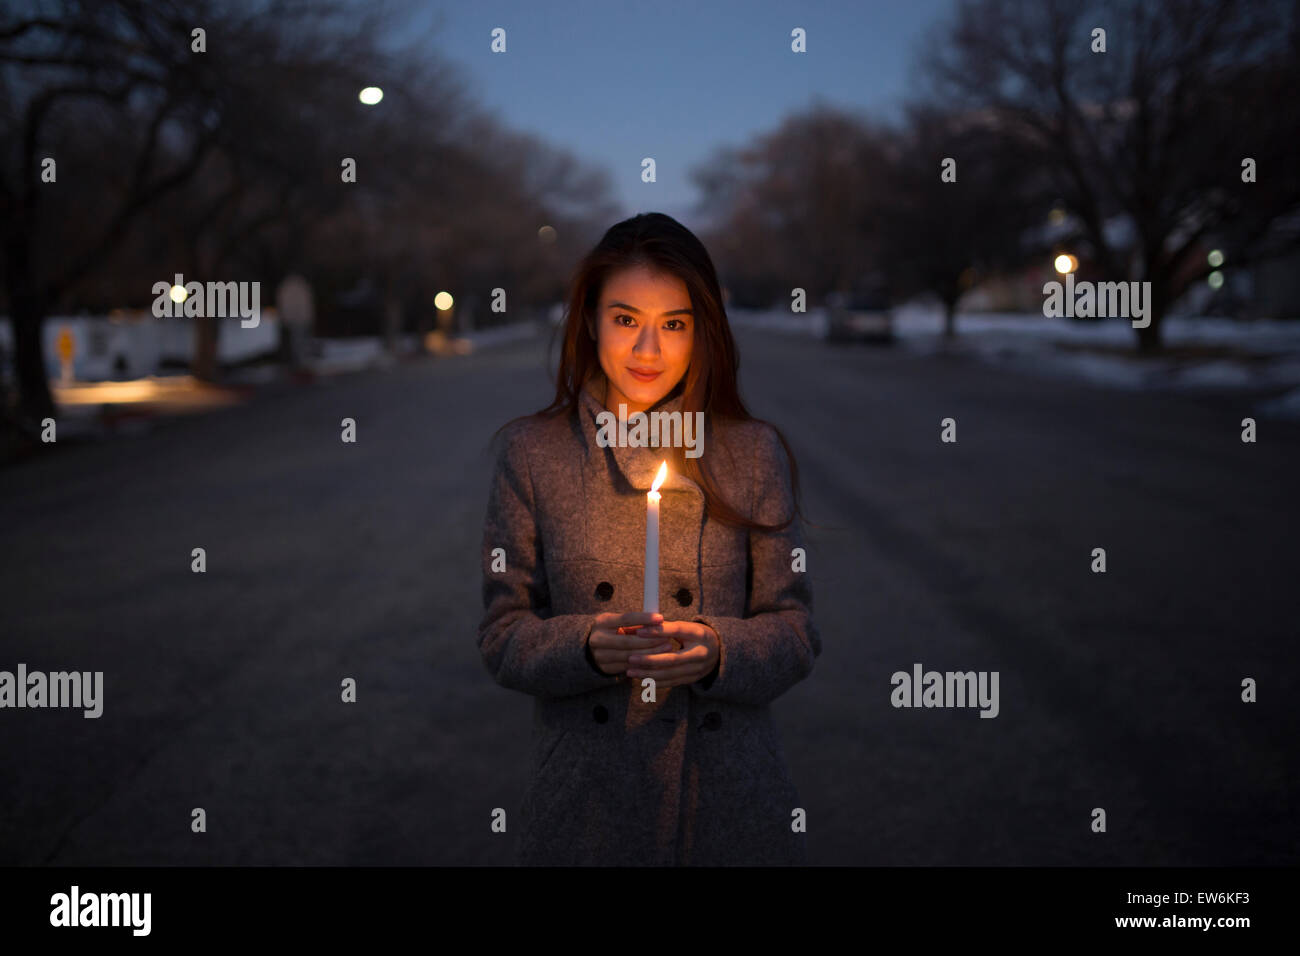 An Asian girl in a coat holds a candle at dusk in the road of a small town environment. Stock Photo